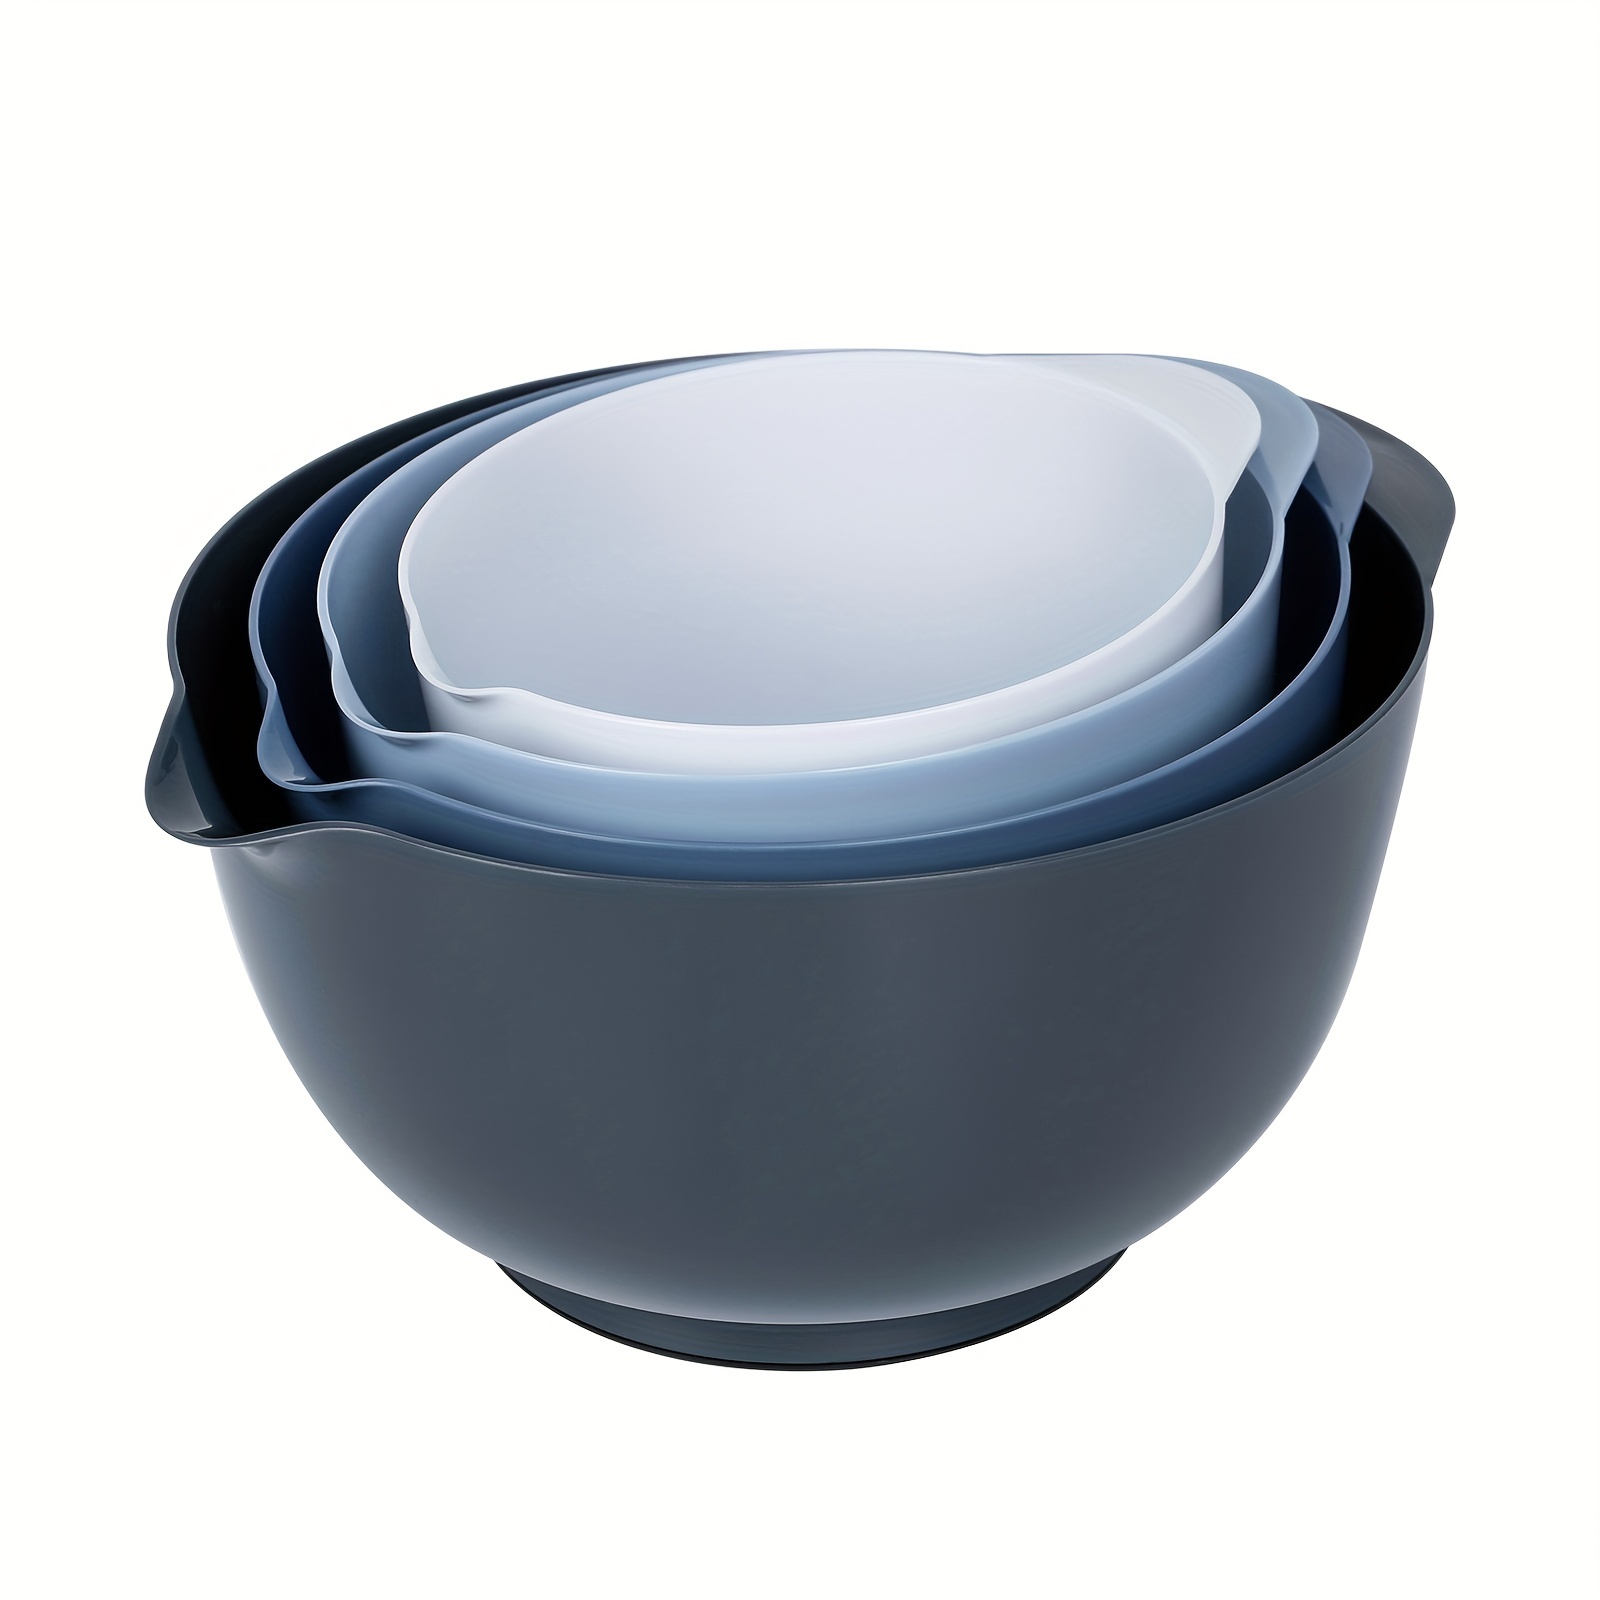 Microwave Safe Mixing Bowls